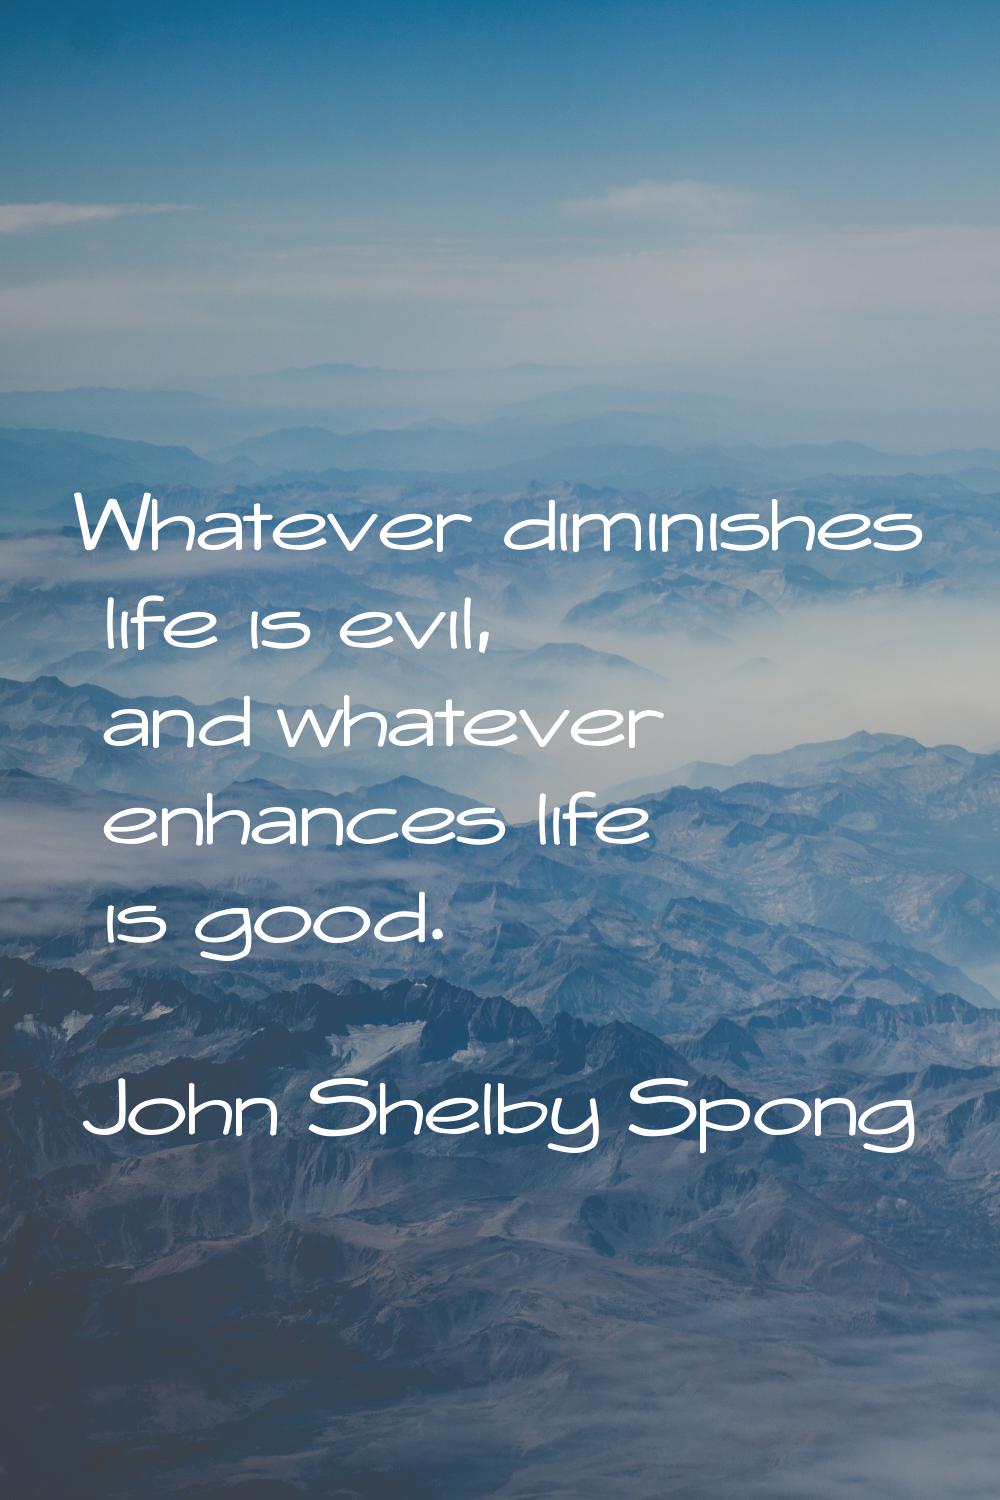 Whatever diminishes life is evil, and whatever enhances life is good.